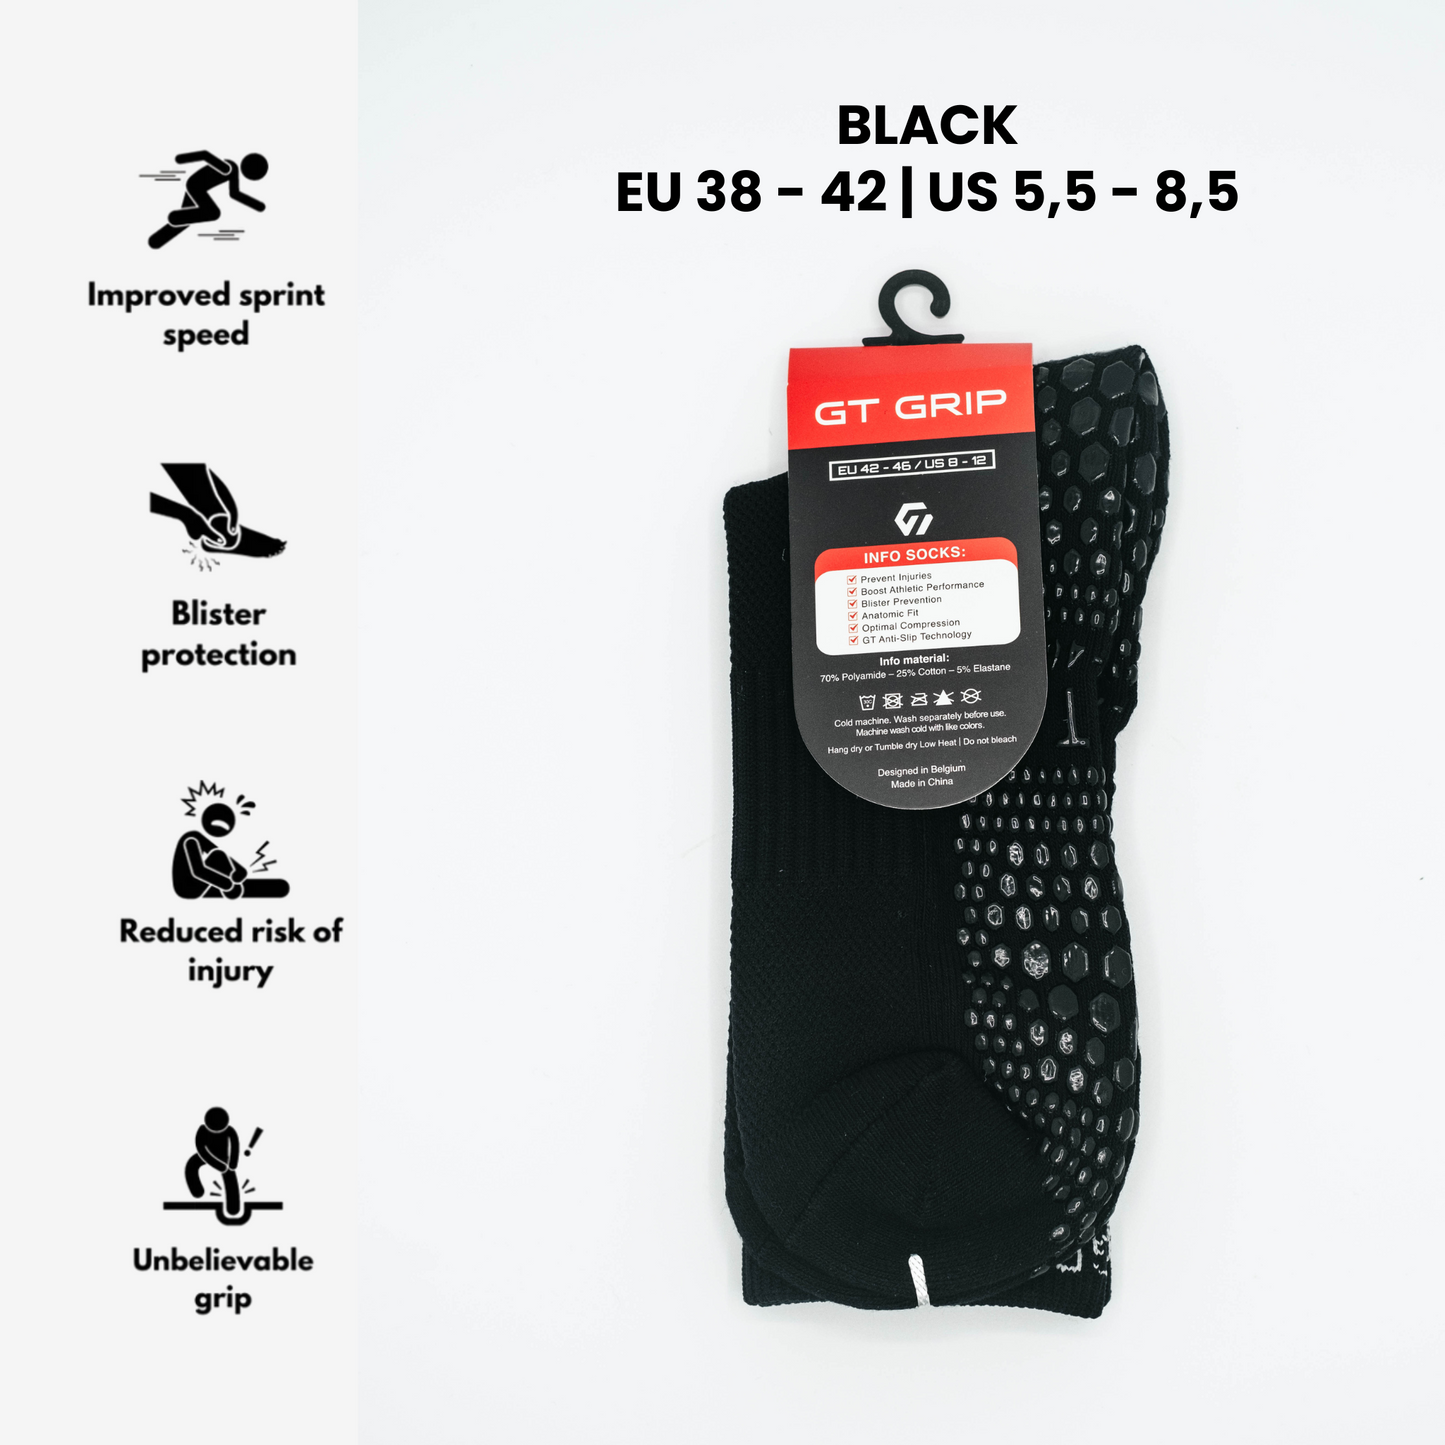 GT GRIP Black Performance Socks - Grip Socks - Size EU 38-42 | US 5.5-8.5 for Superior Stability, Anti-Blister Comfort, and Enhanced Traction